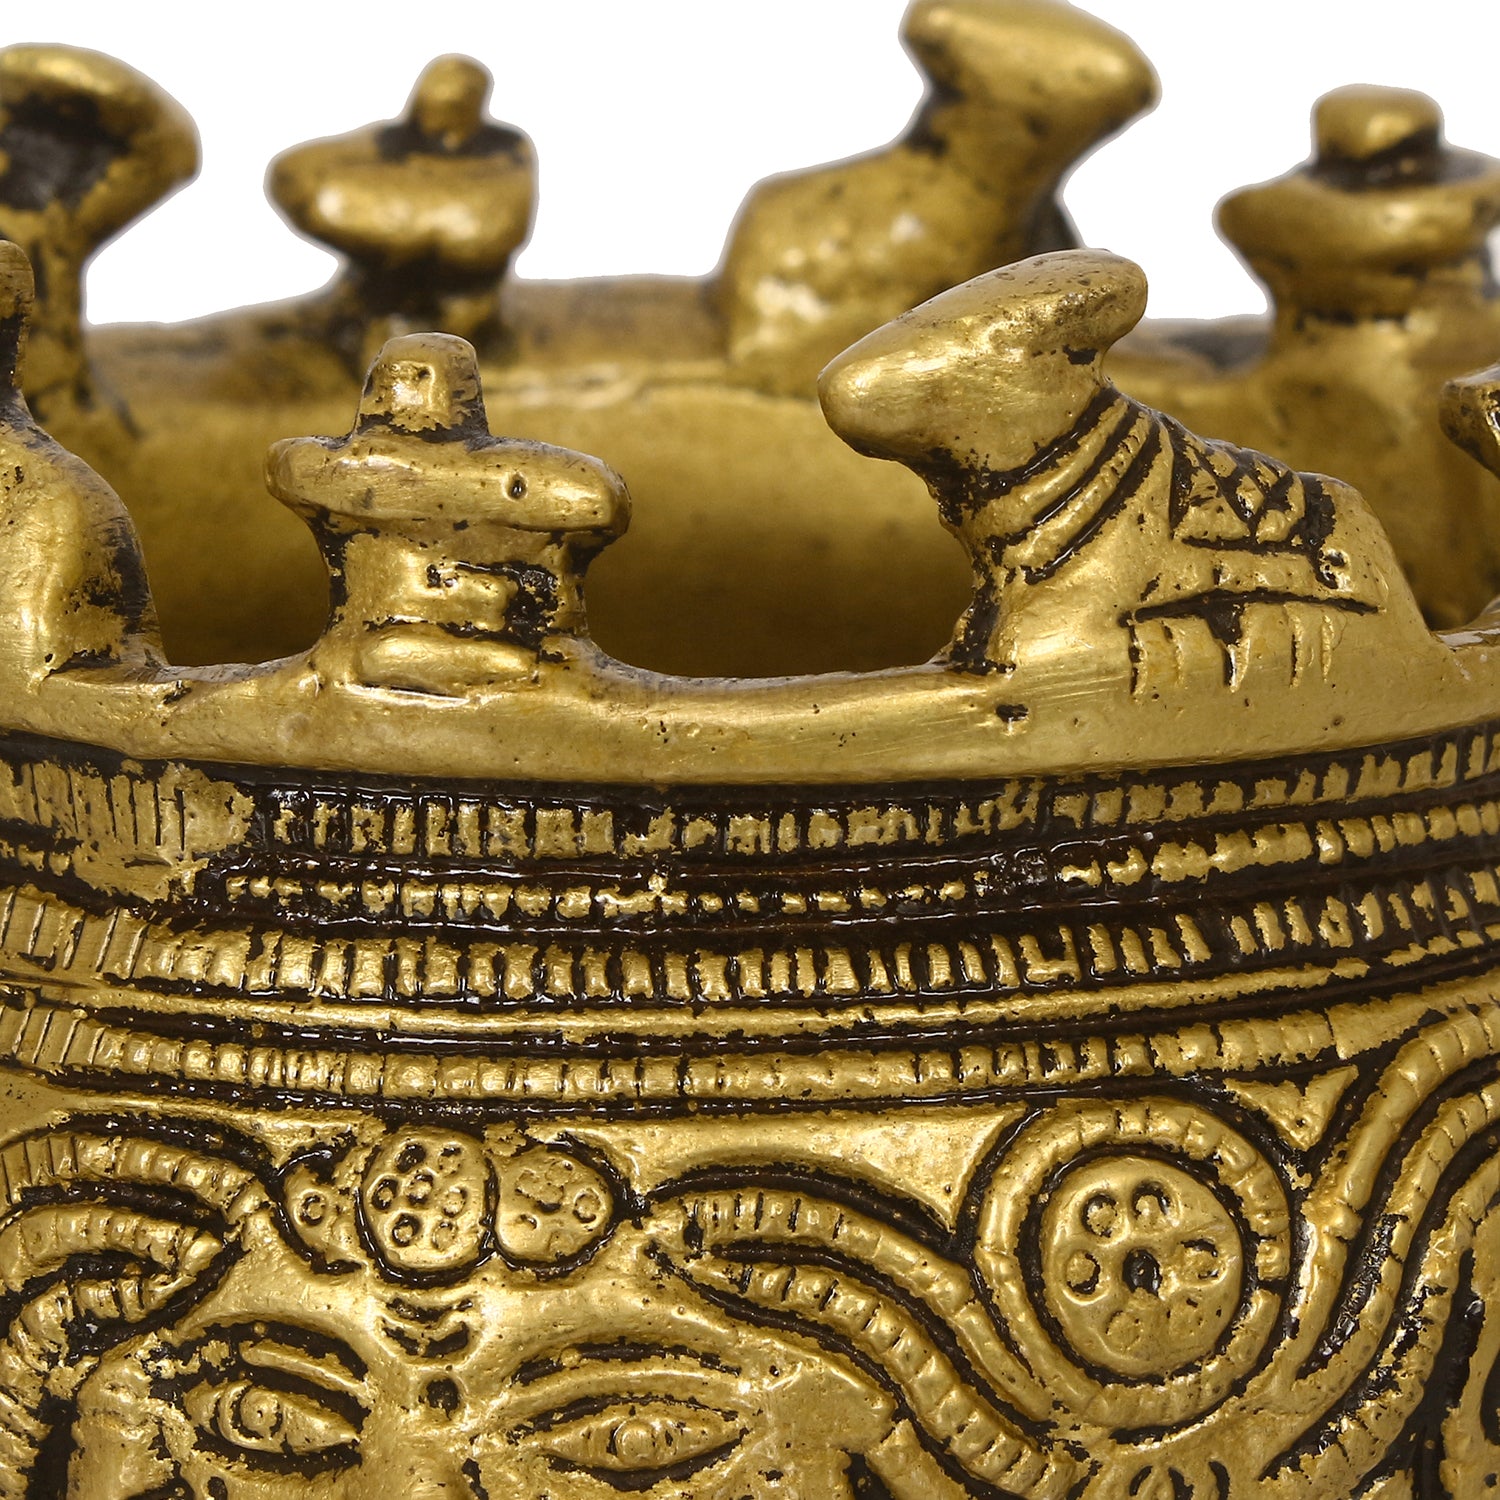 Golden Brass Auspicious Kalash, Shivling And Nandi On The Rim Of The Kalash/Pot For Religious Offerings 4